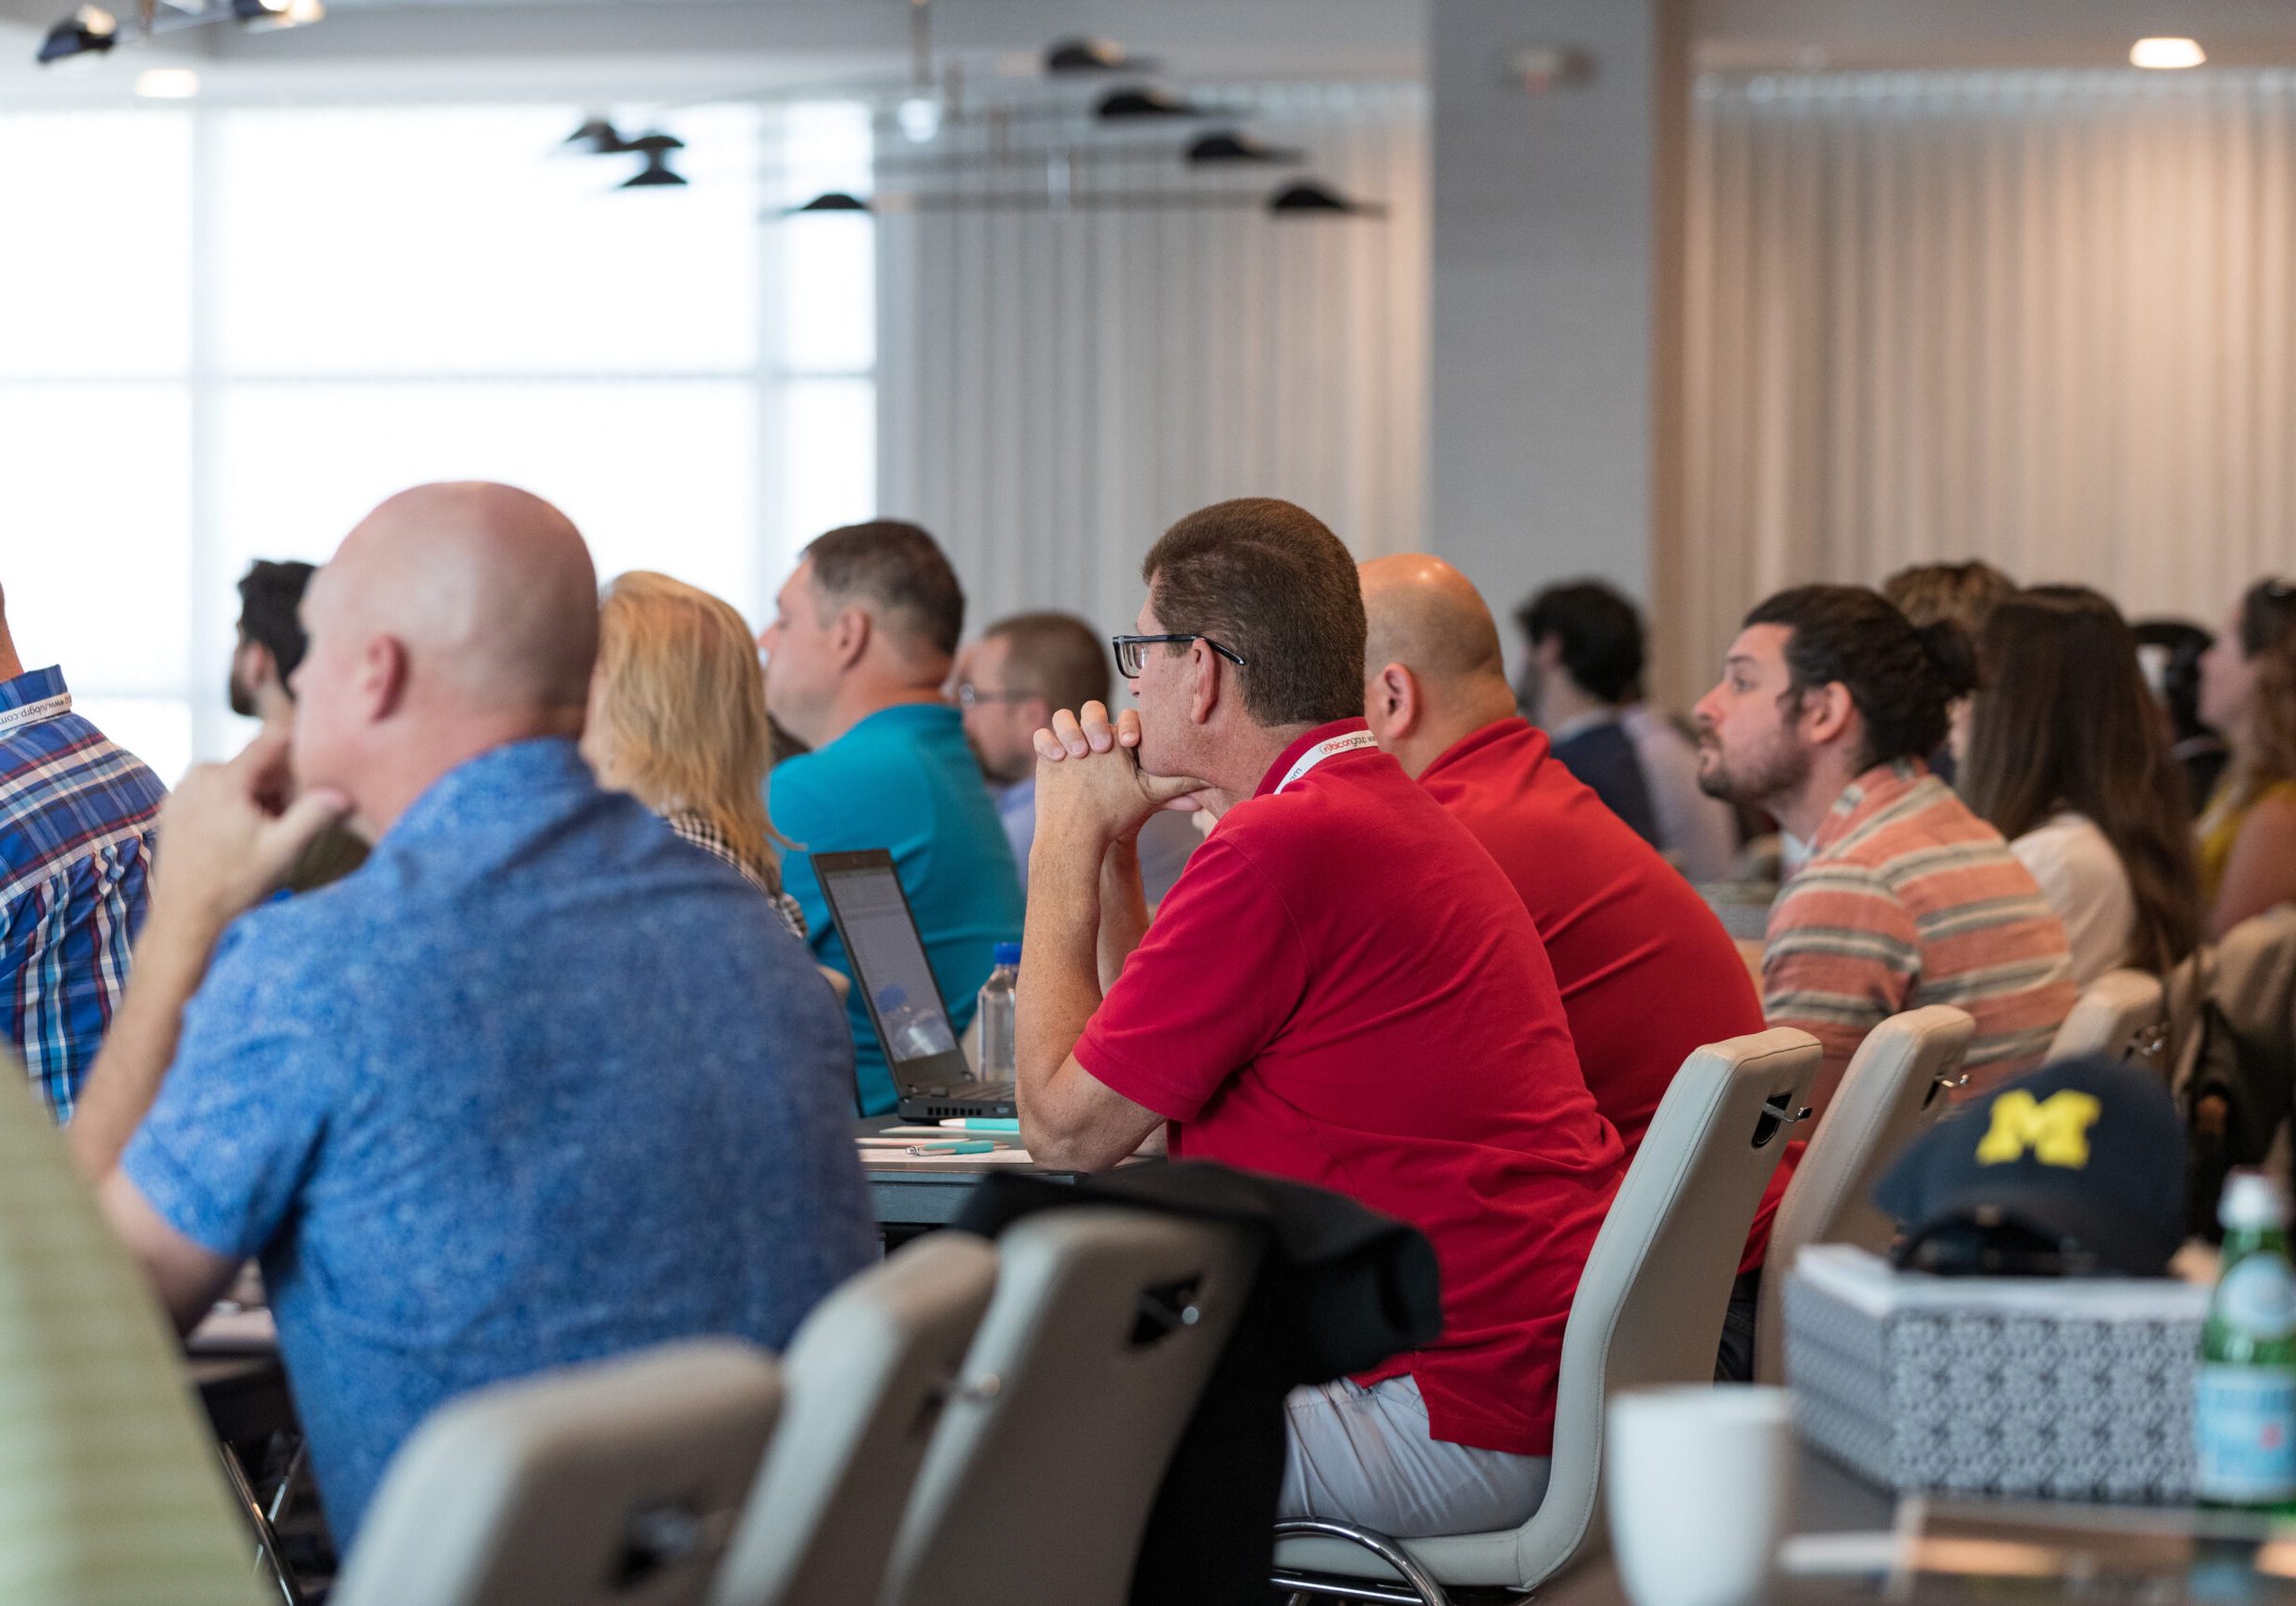 Attendees at The Users Group carefully listen to the Rubicon Team presenting.